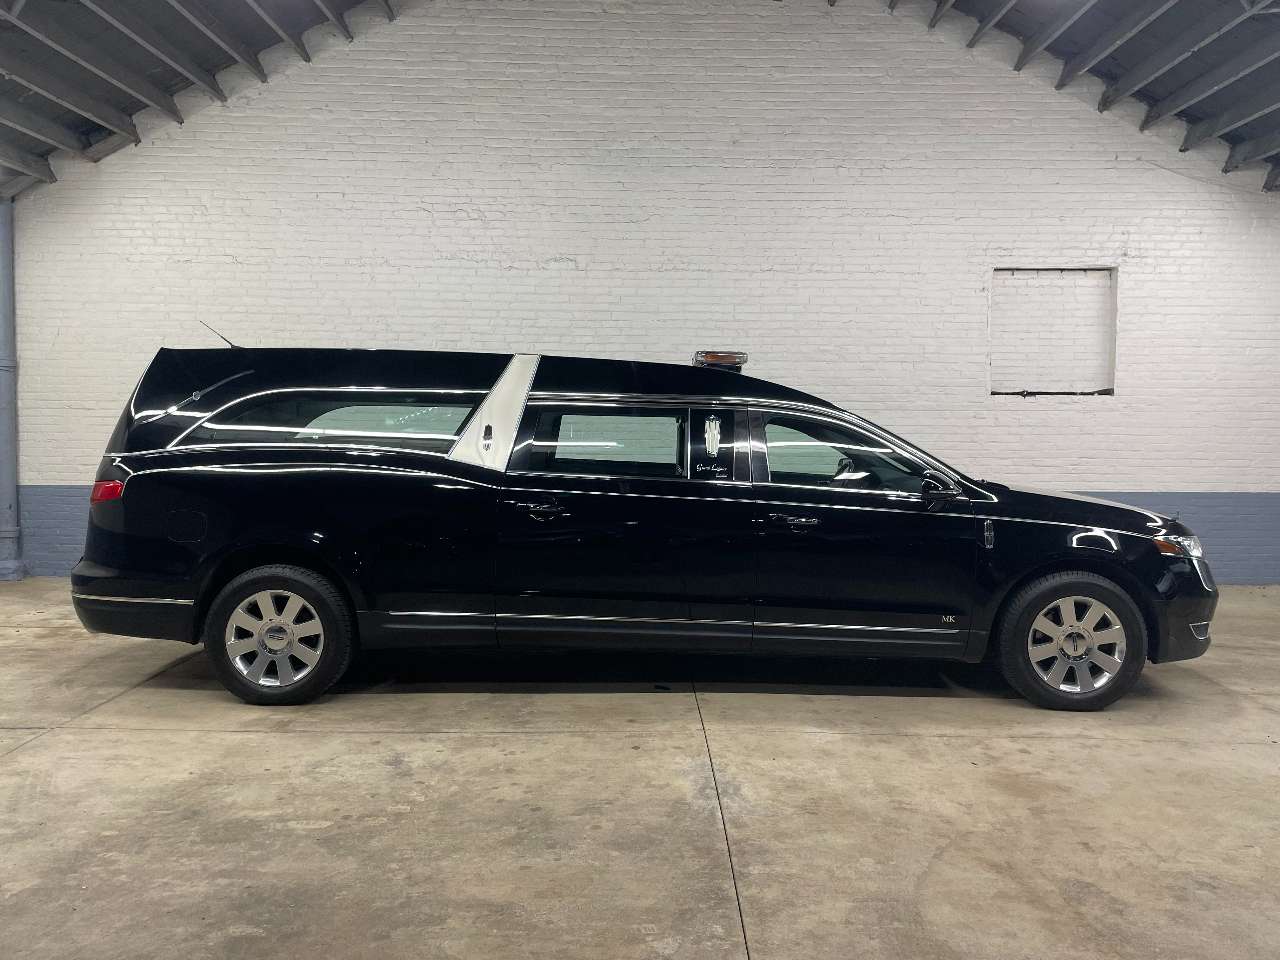 2017 Lincoln MK Grand Legacy Limited Hearse 1663948680242